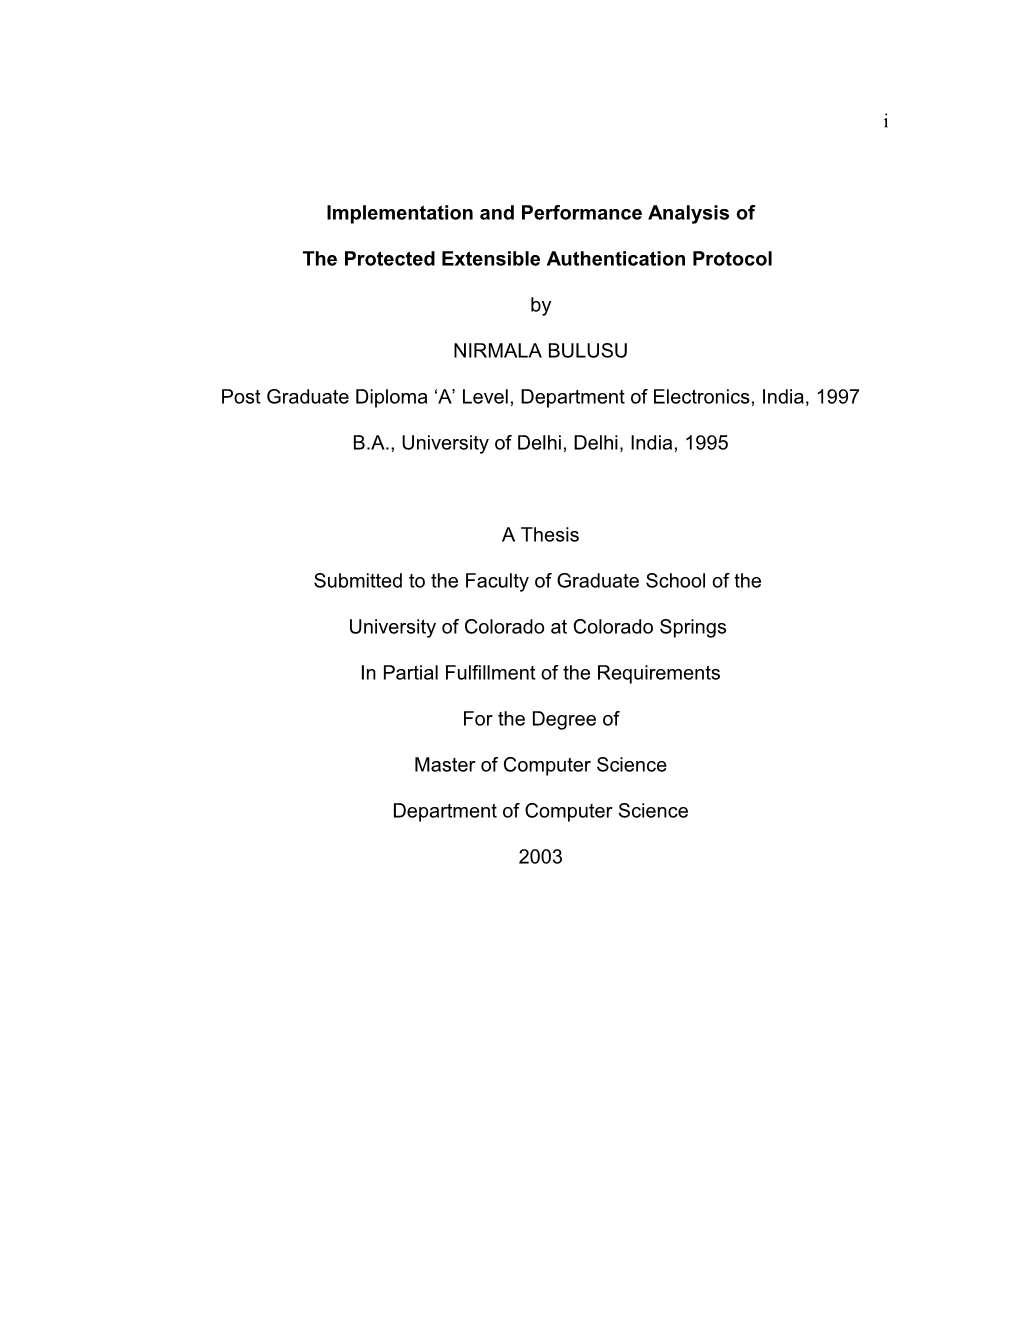 Implementation and Performance Analysis Of